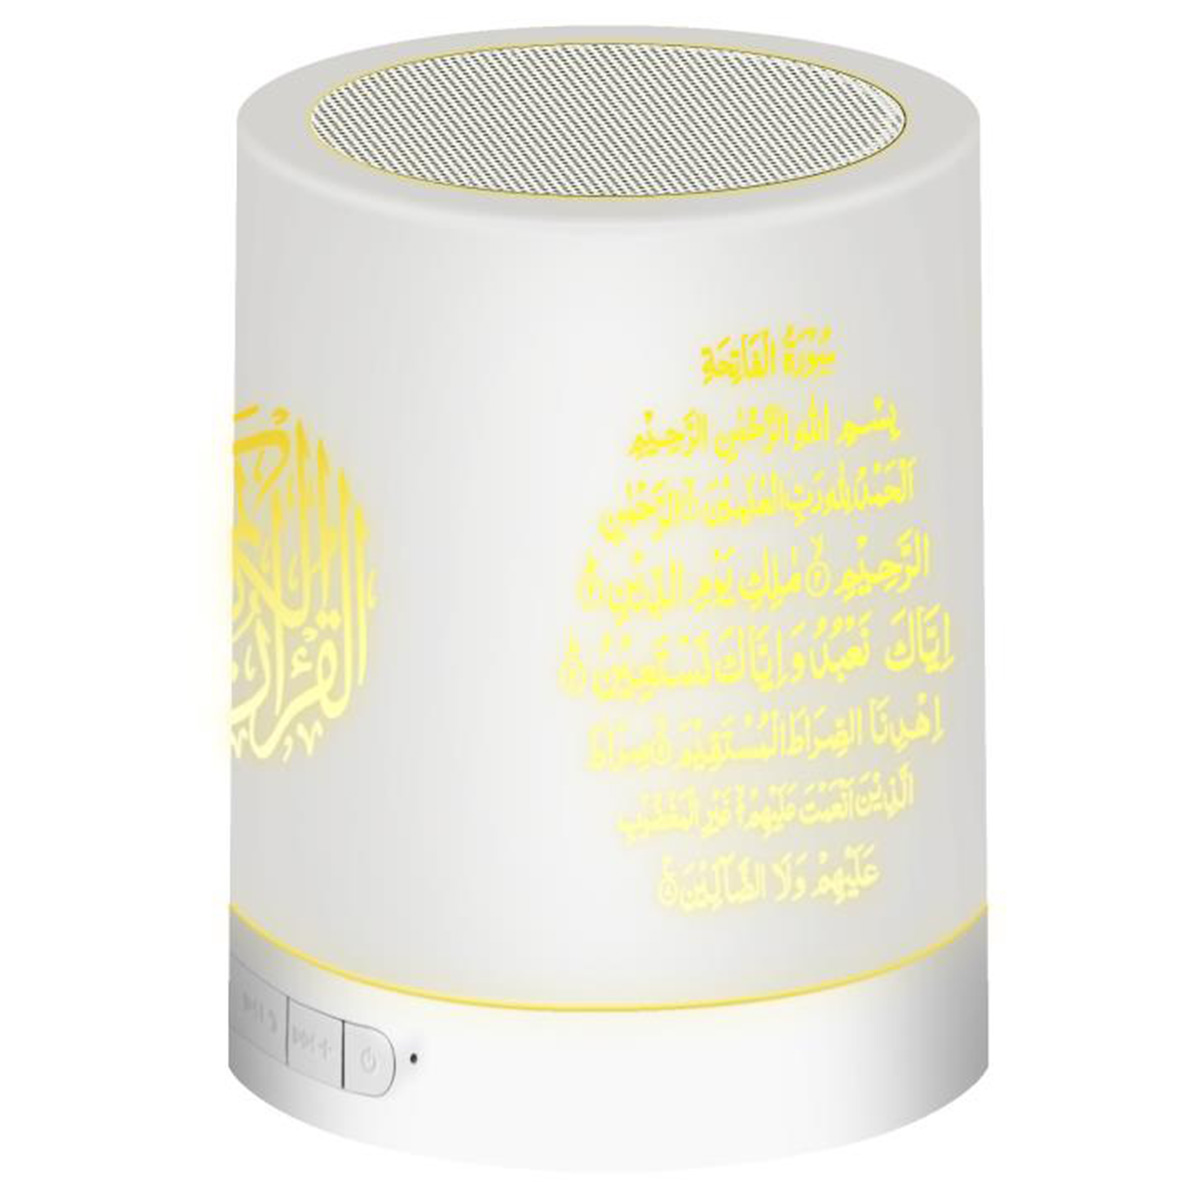 Bakeey-Portable-USB-Charging-Wireless-bluetooth-Colorful-Discoloration-Speaker-Remote-Control-Quran--1650378-7